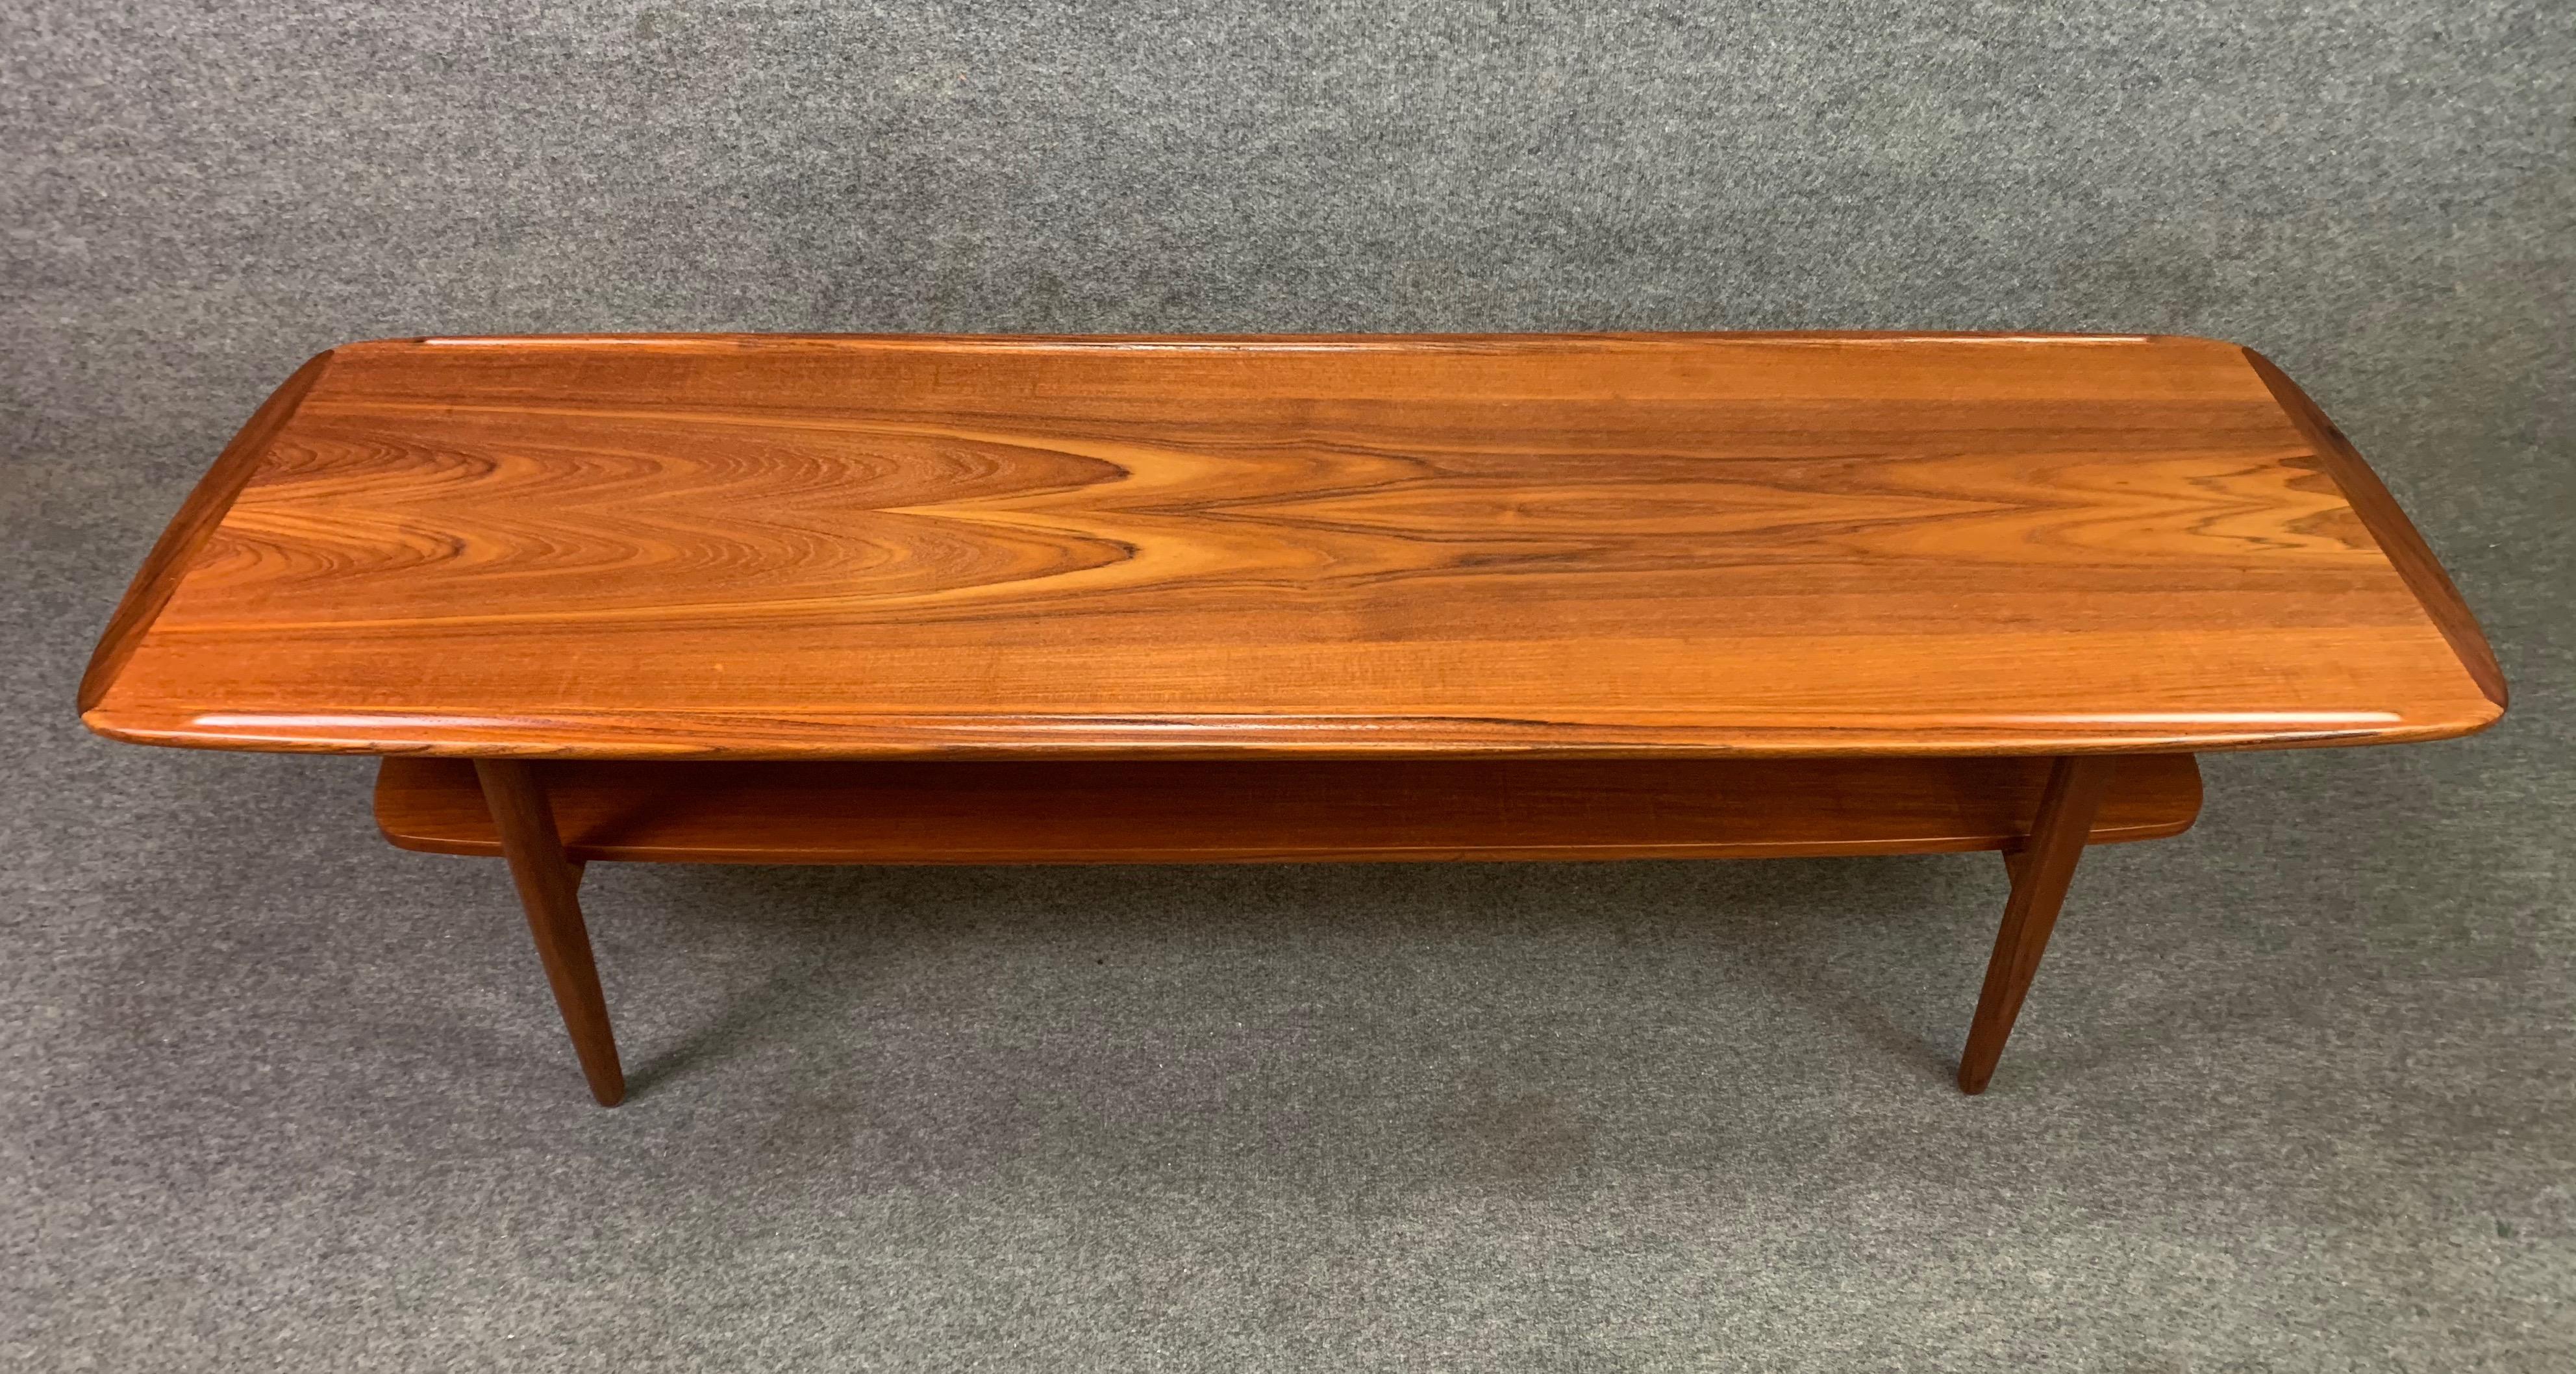 Here is a beautiful and long 1960s Scandinavian Modern coffee table in teak recently imported from Denmark to California.
This fully restored 